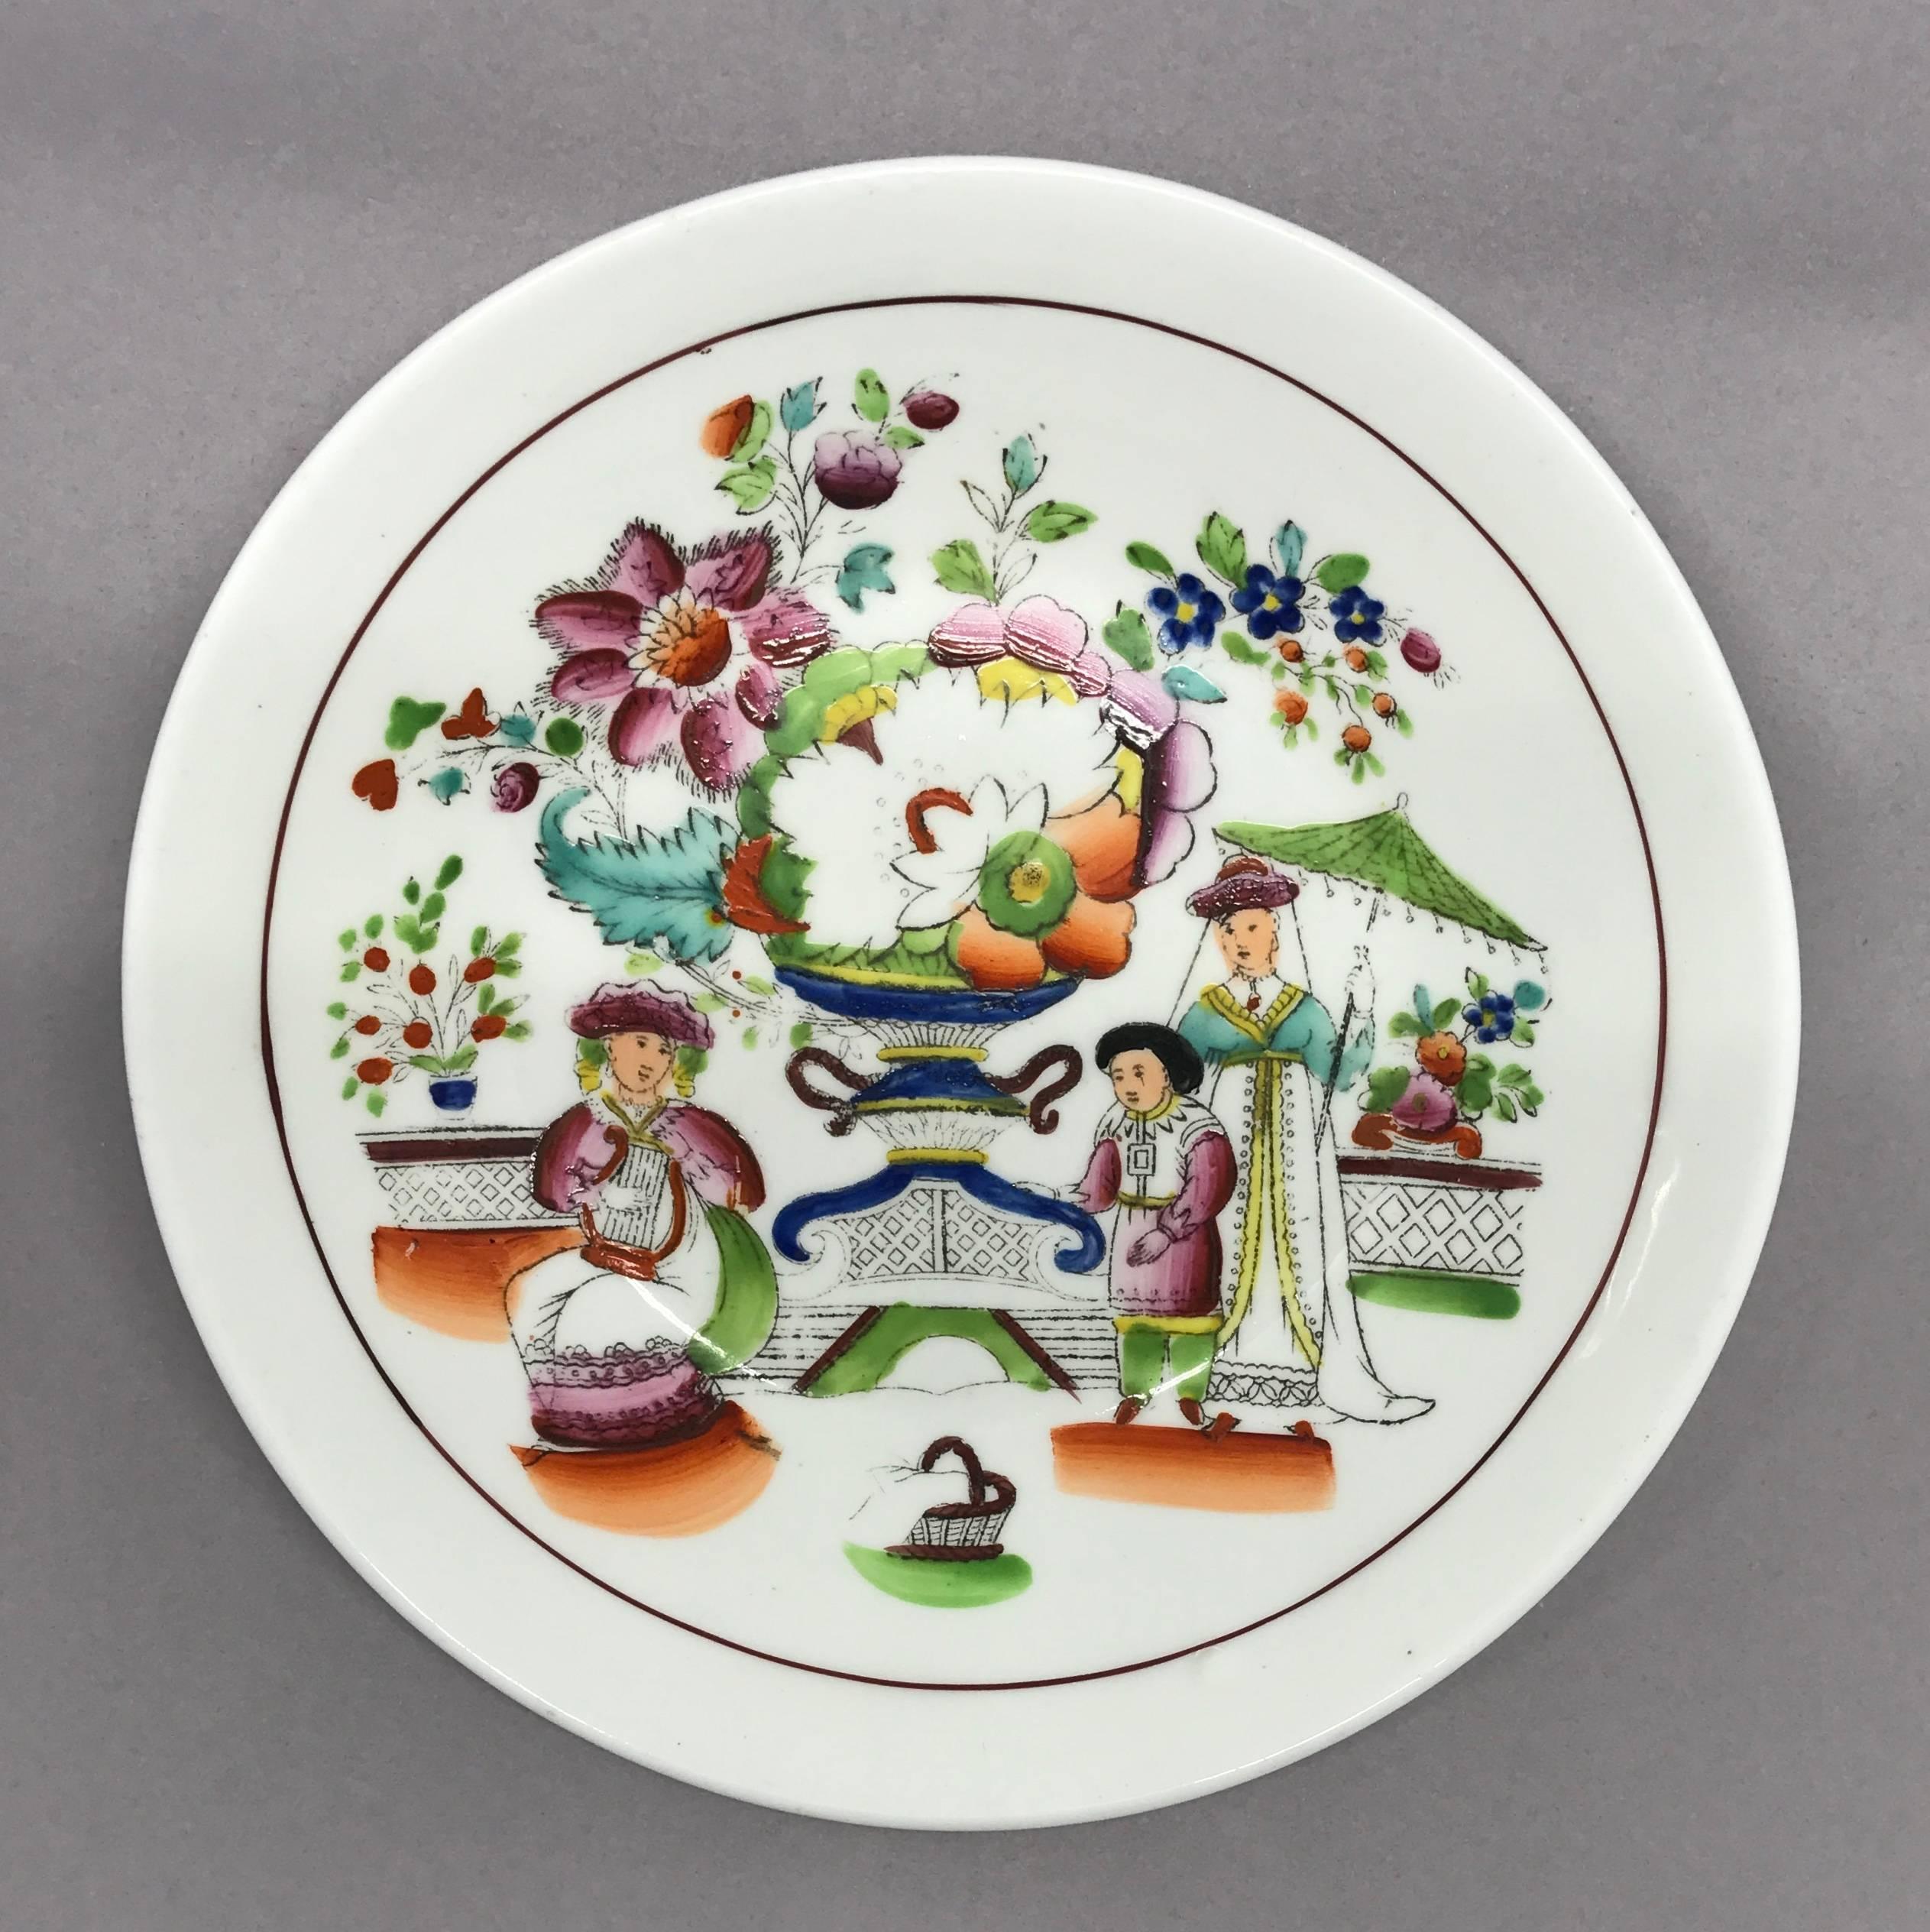 Small English chinoiserie plate. William IV Staffordshire plate with charming brightly hued oriental themed scene of figures with parasol,, hamper and large blooms in a garden setting, England, circa 1820.
Dimensions: 5.63